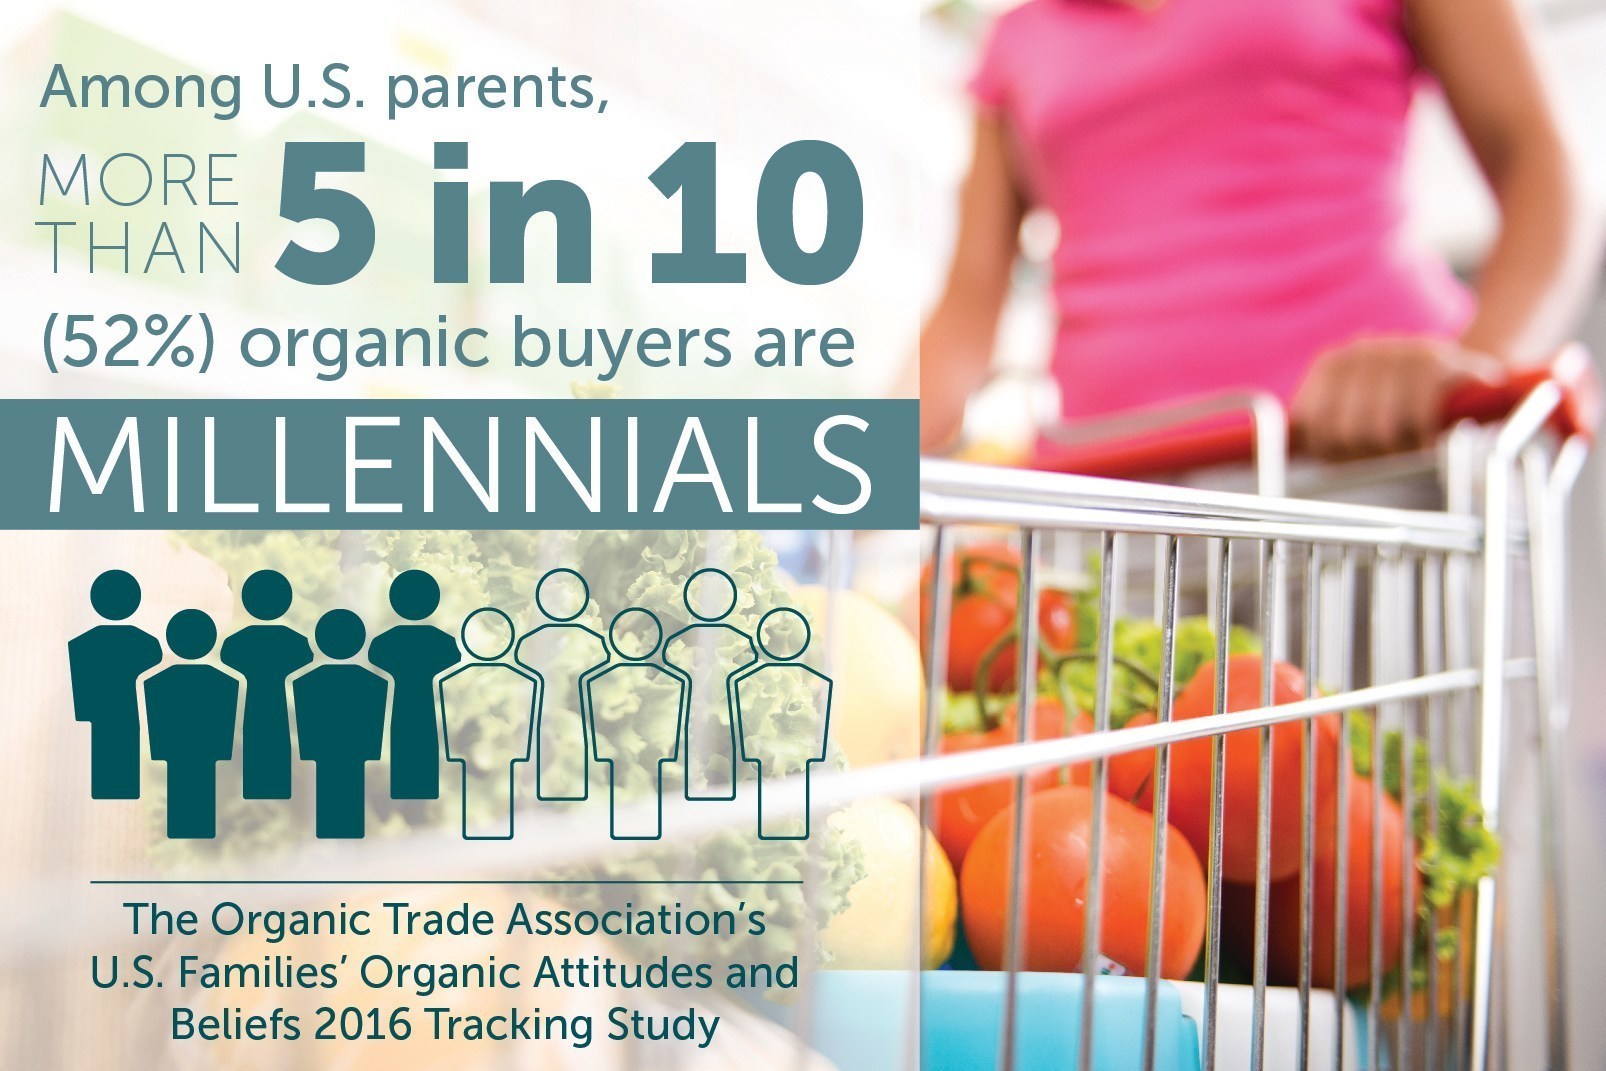 More than 50 percent of U.S. parents who buy organic products are Millennials. (PRNewsFoto/Organic Trade Association)